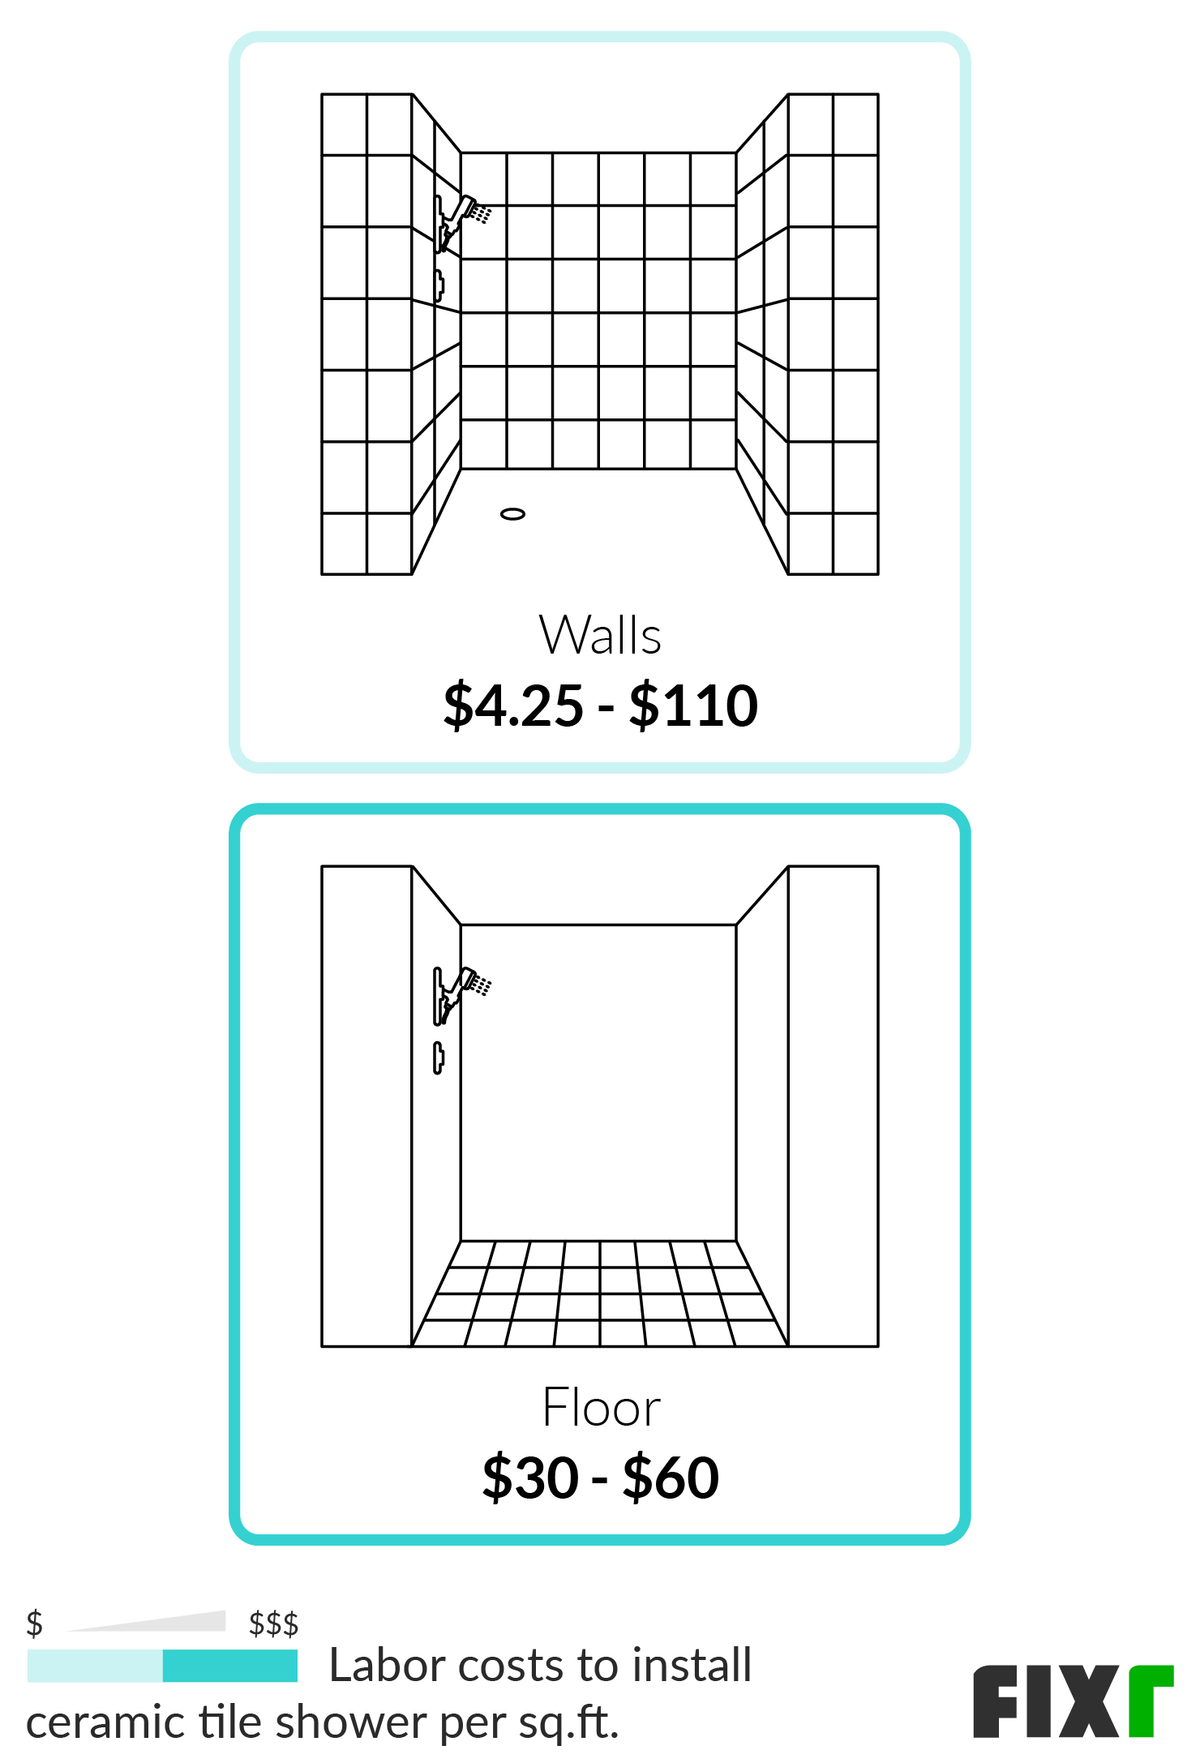 Cost To Install A Ceramic Tile Shower, What Is The Cost Per Square Foot To Install Ceramic Tile